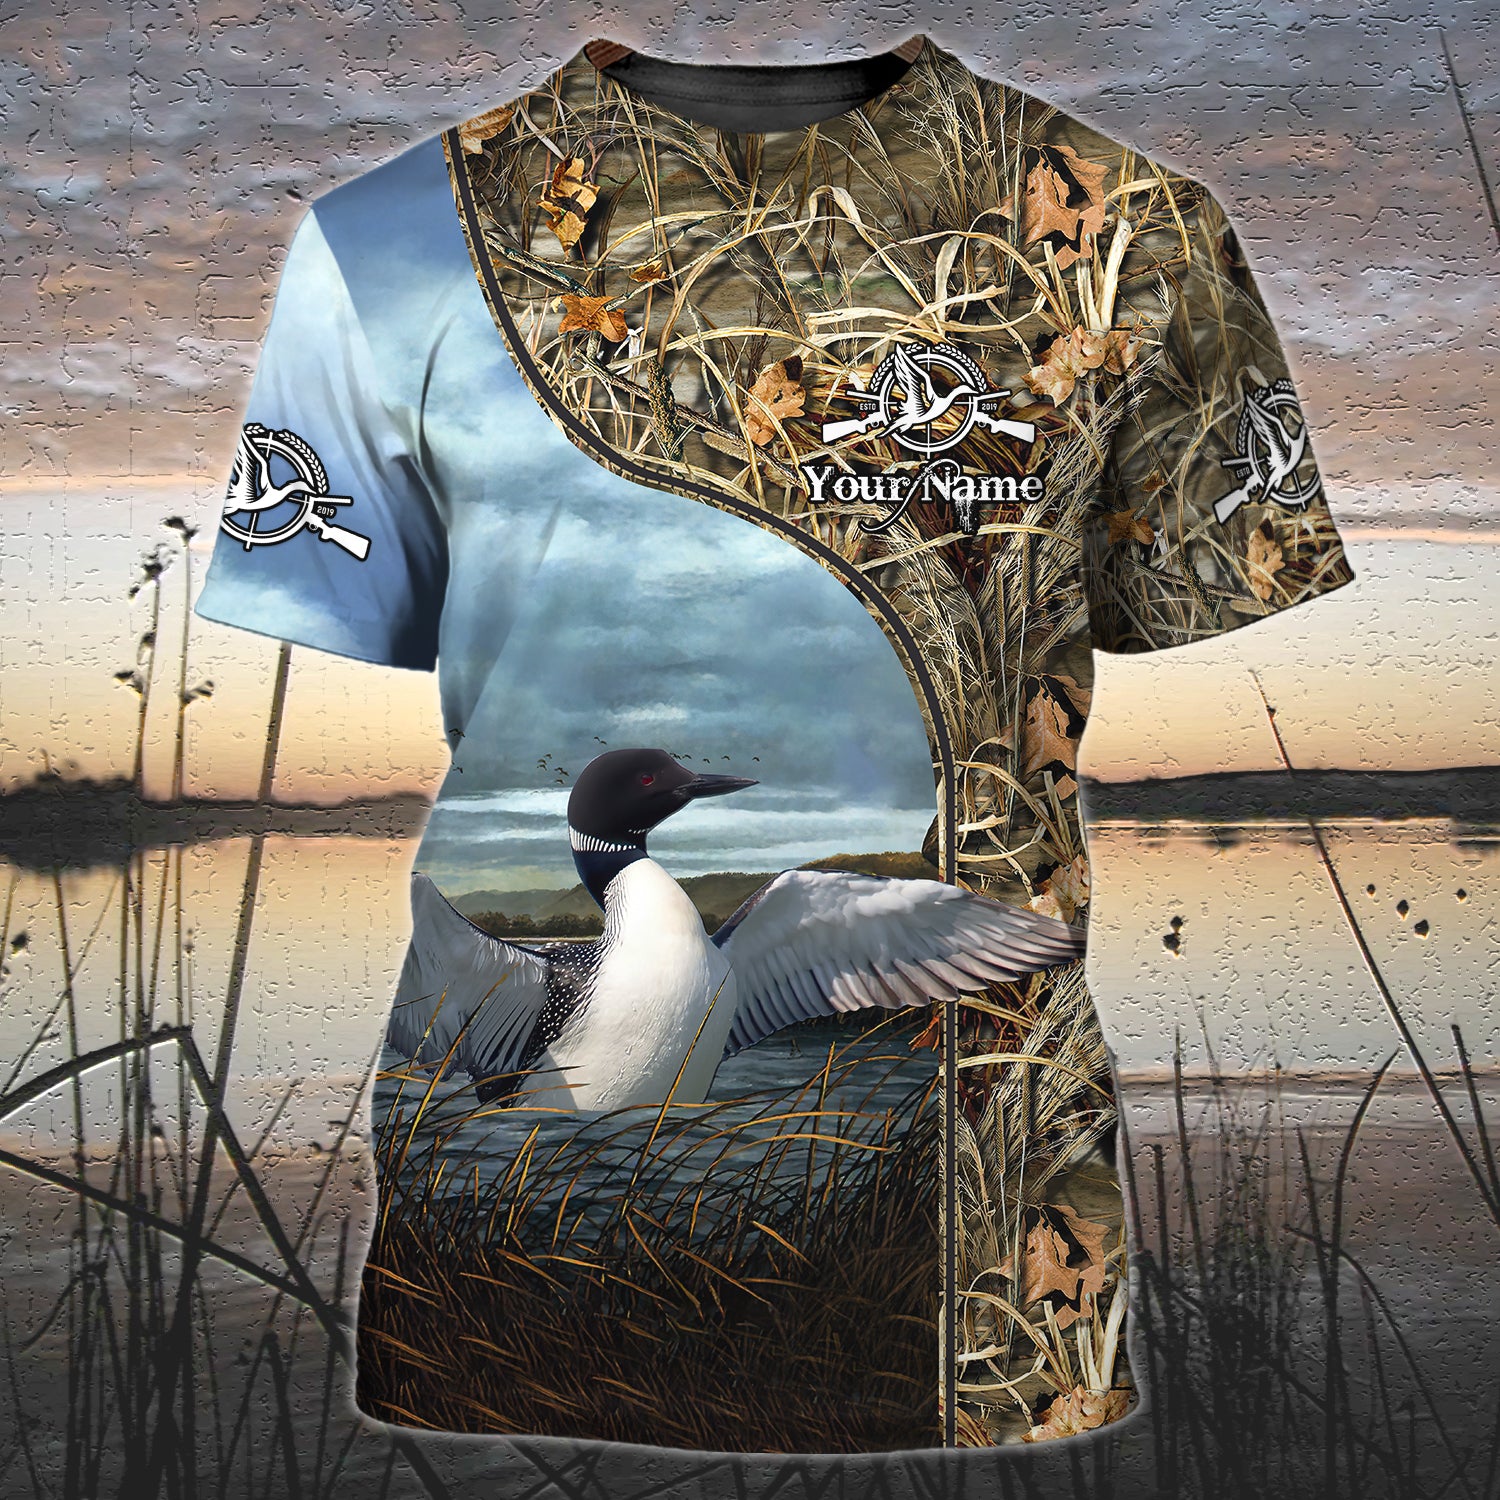 Loon 2 - Personalized Name 3D Tshirt 21 - Nvc97